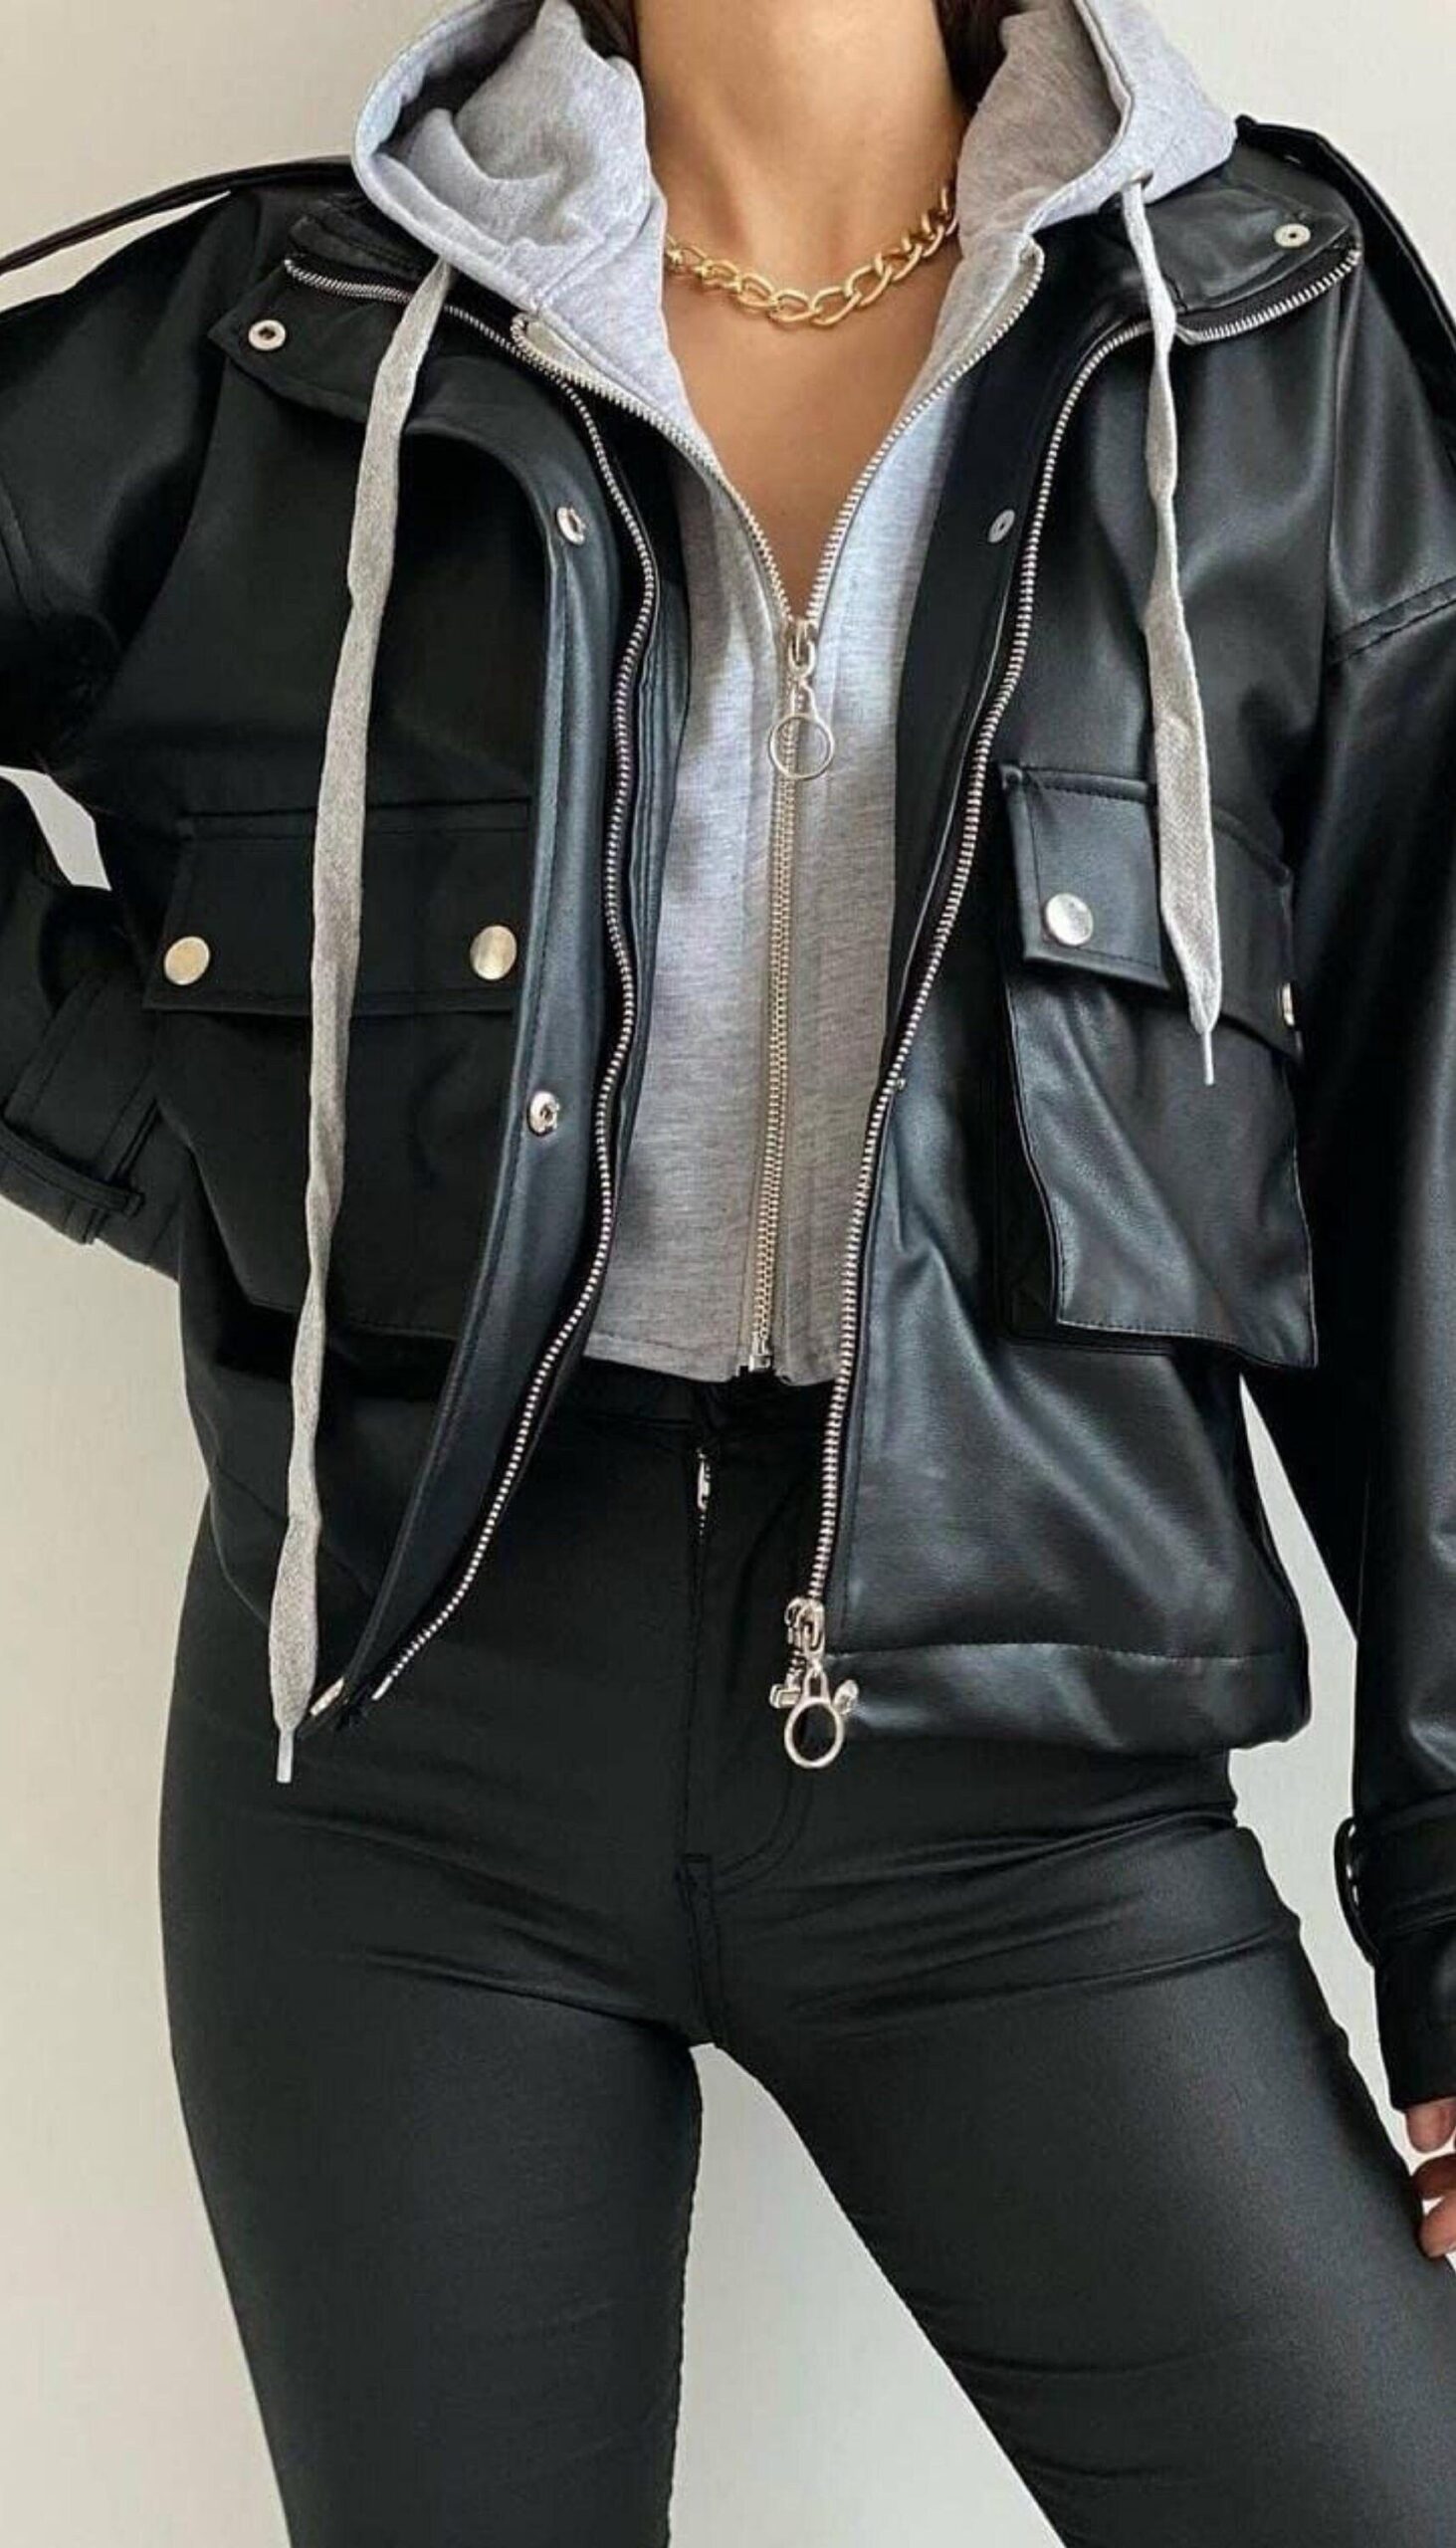 How to Wear Hooded Leather Jacket: Top 13 Outfit Ideas for Women